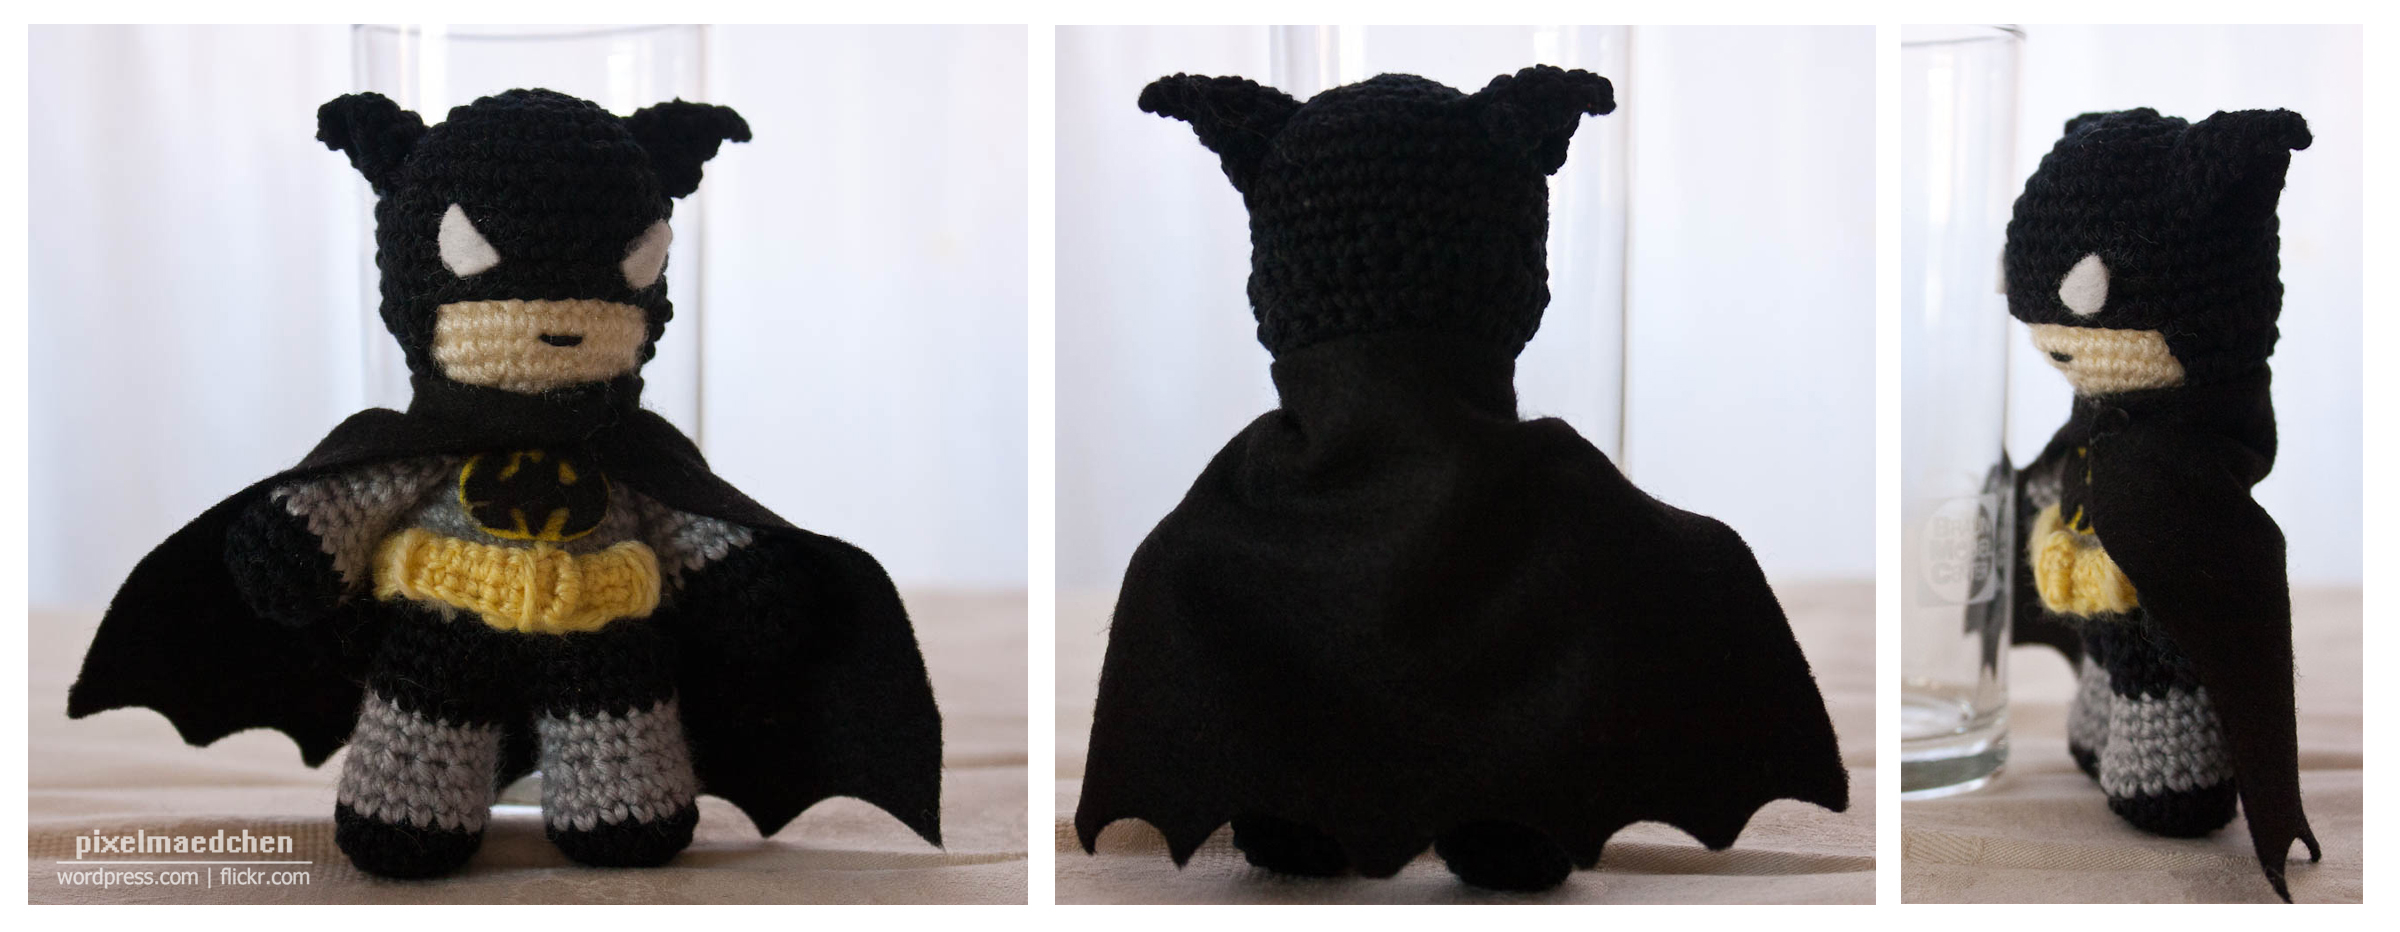 Batman Doll Knitting Pattern Project 52 Becomes Project 12 March 2014 Letters From Mars